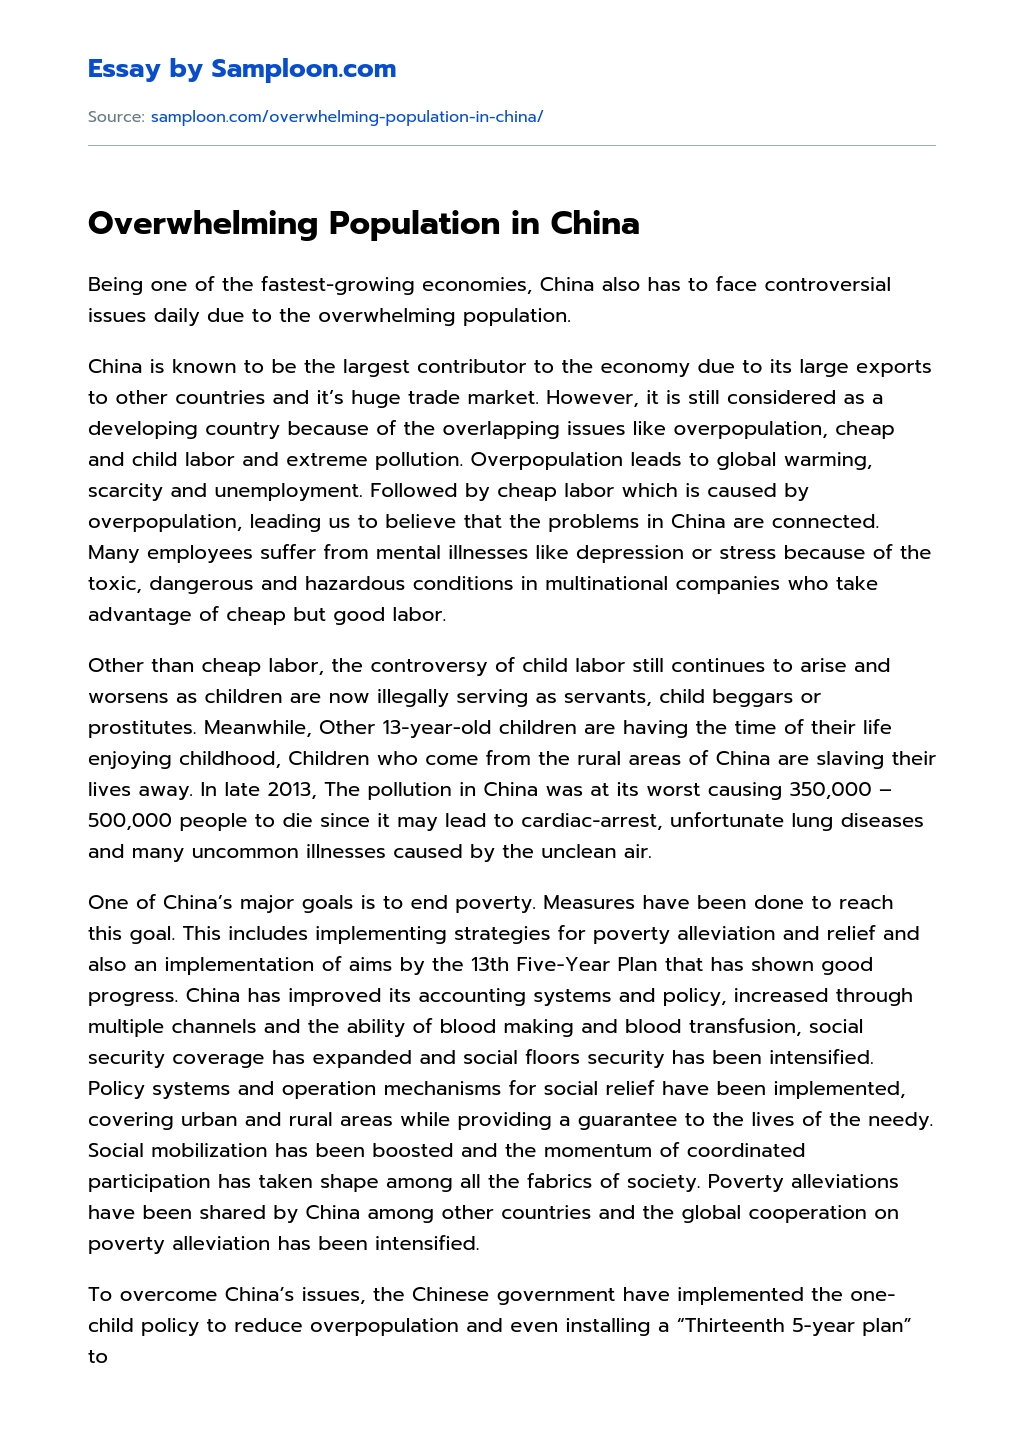 Overwhelming Population in China essay